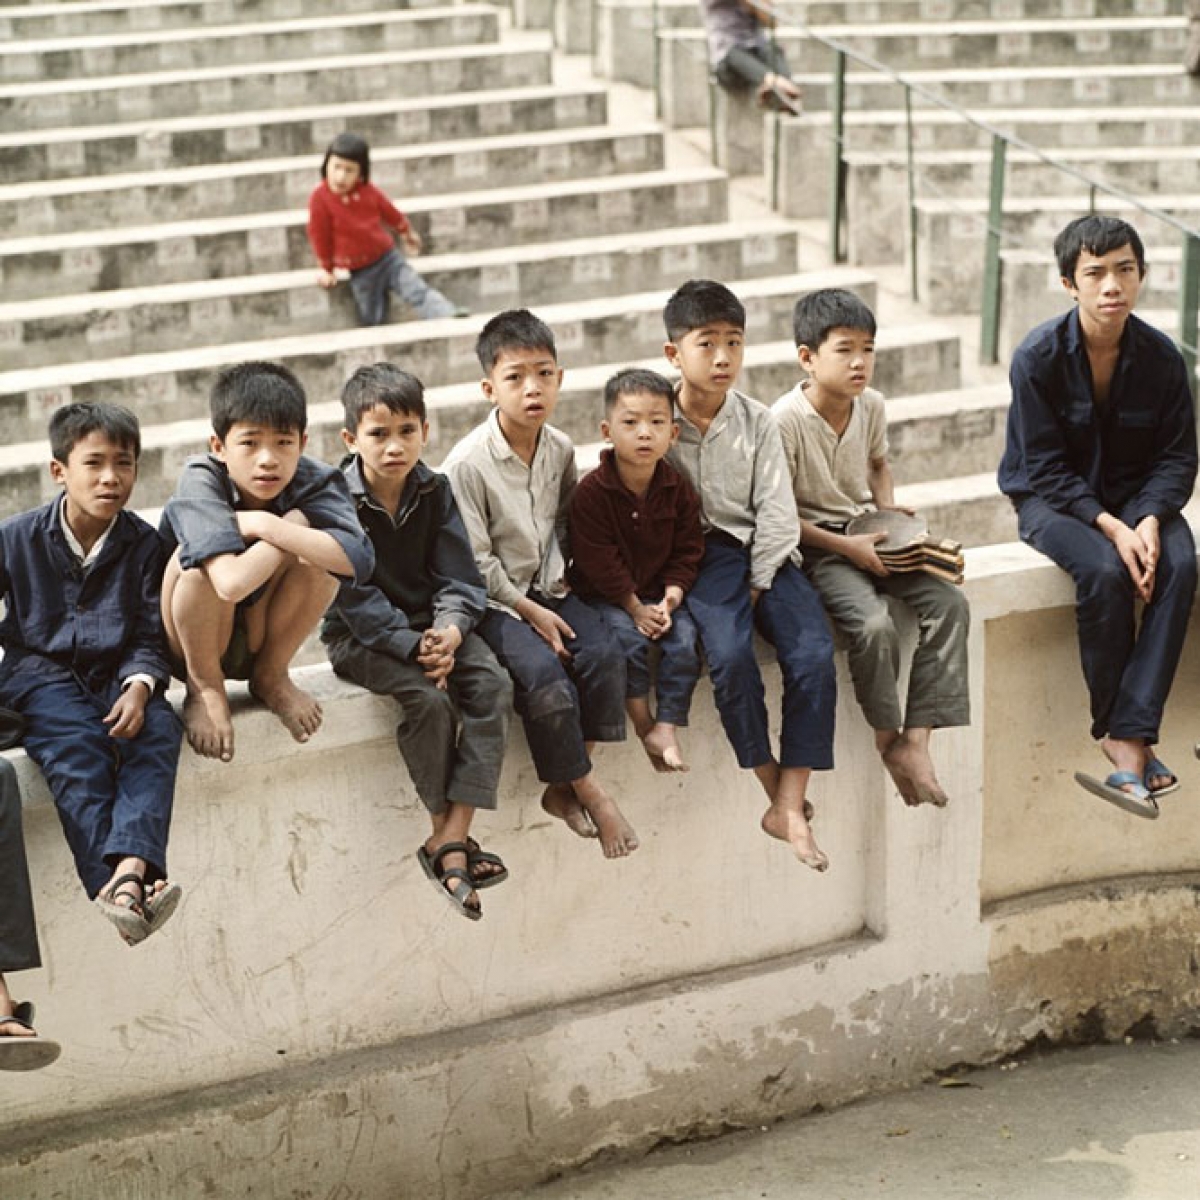 Children gather at the Hang Day stadium in 1975.